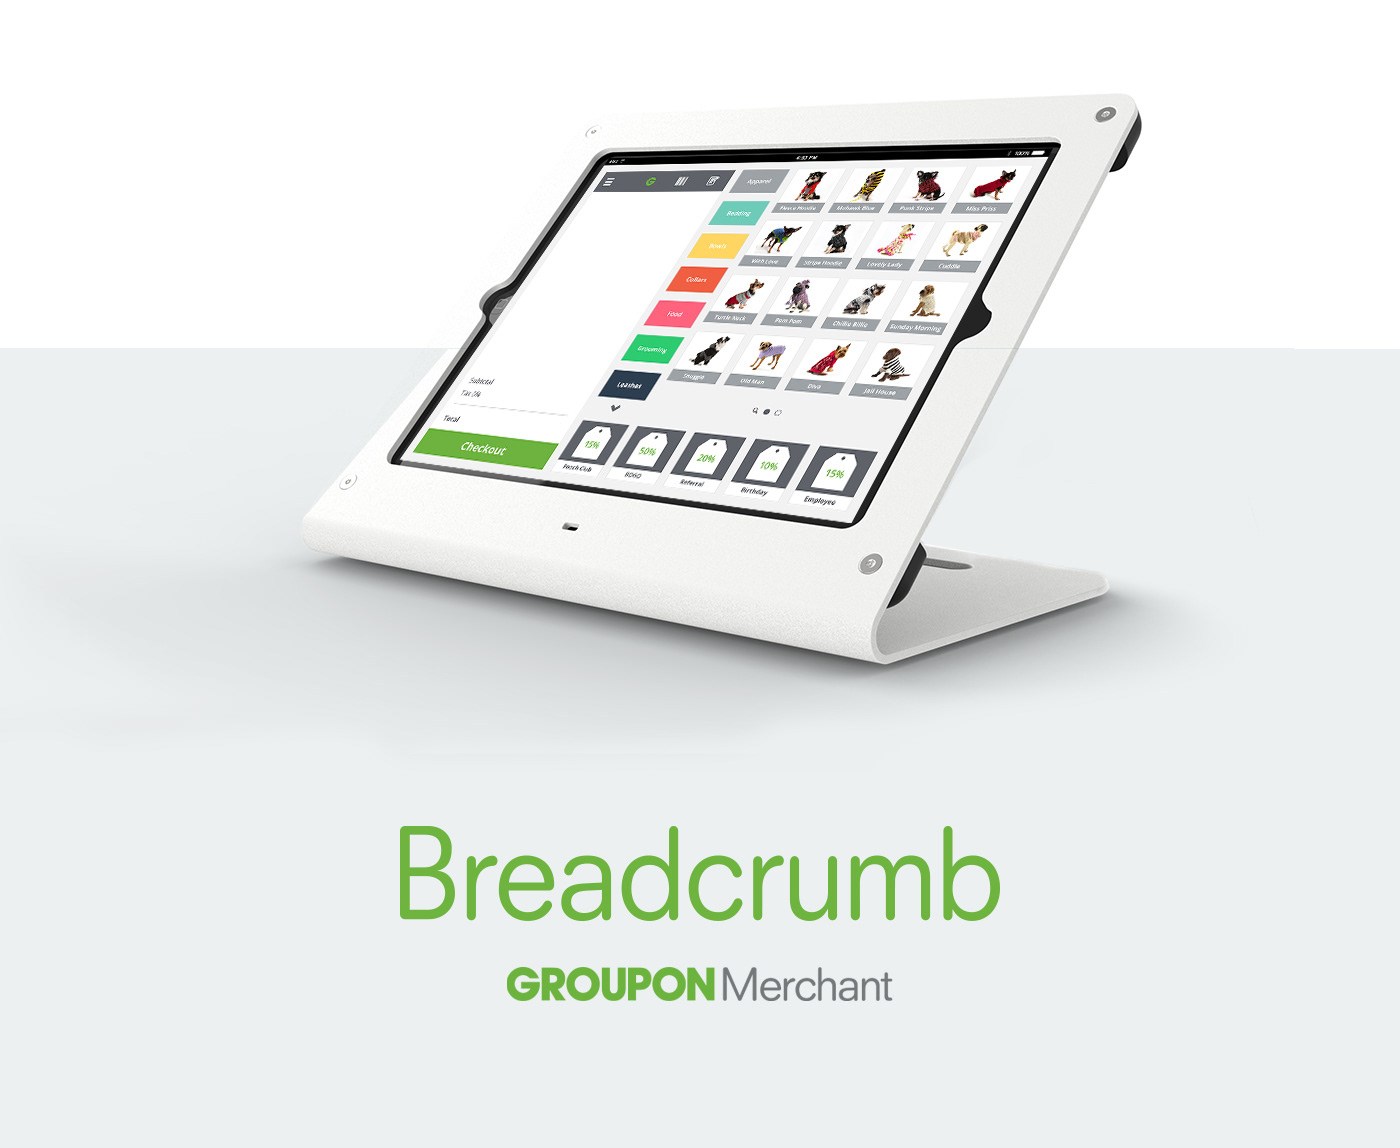 Breadcrumb pos redesign point of sales groupon interface design User Experince merchant facing